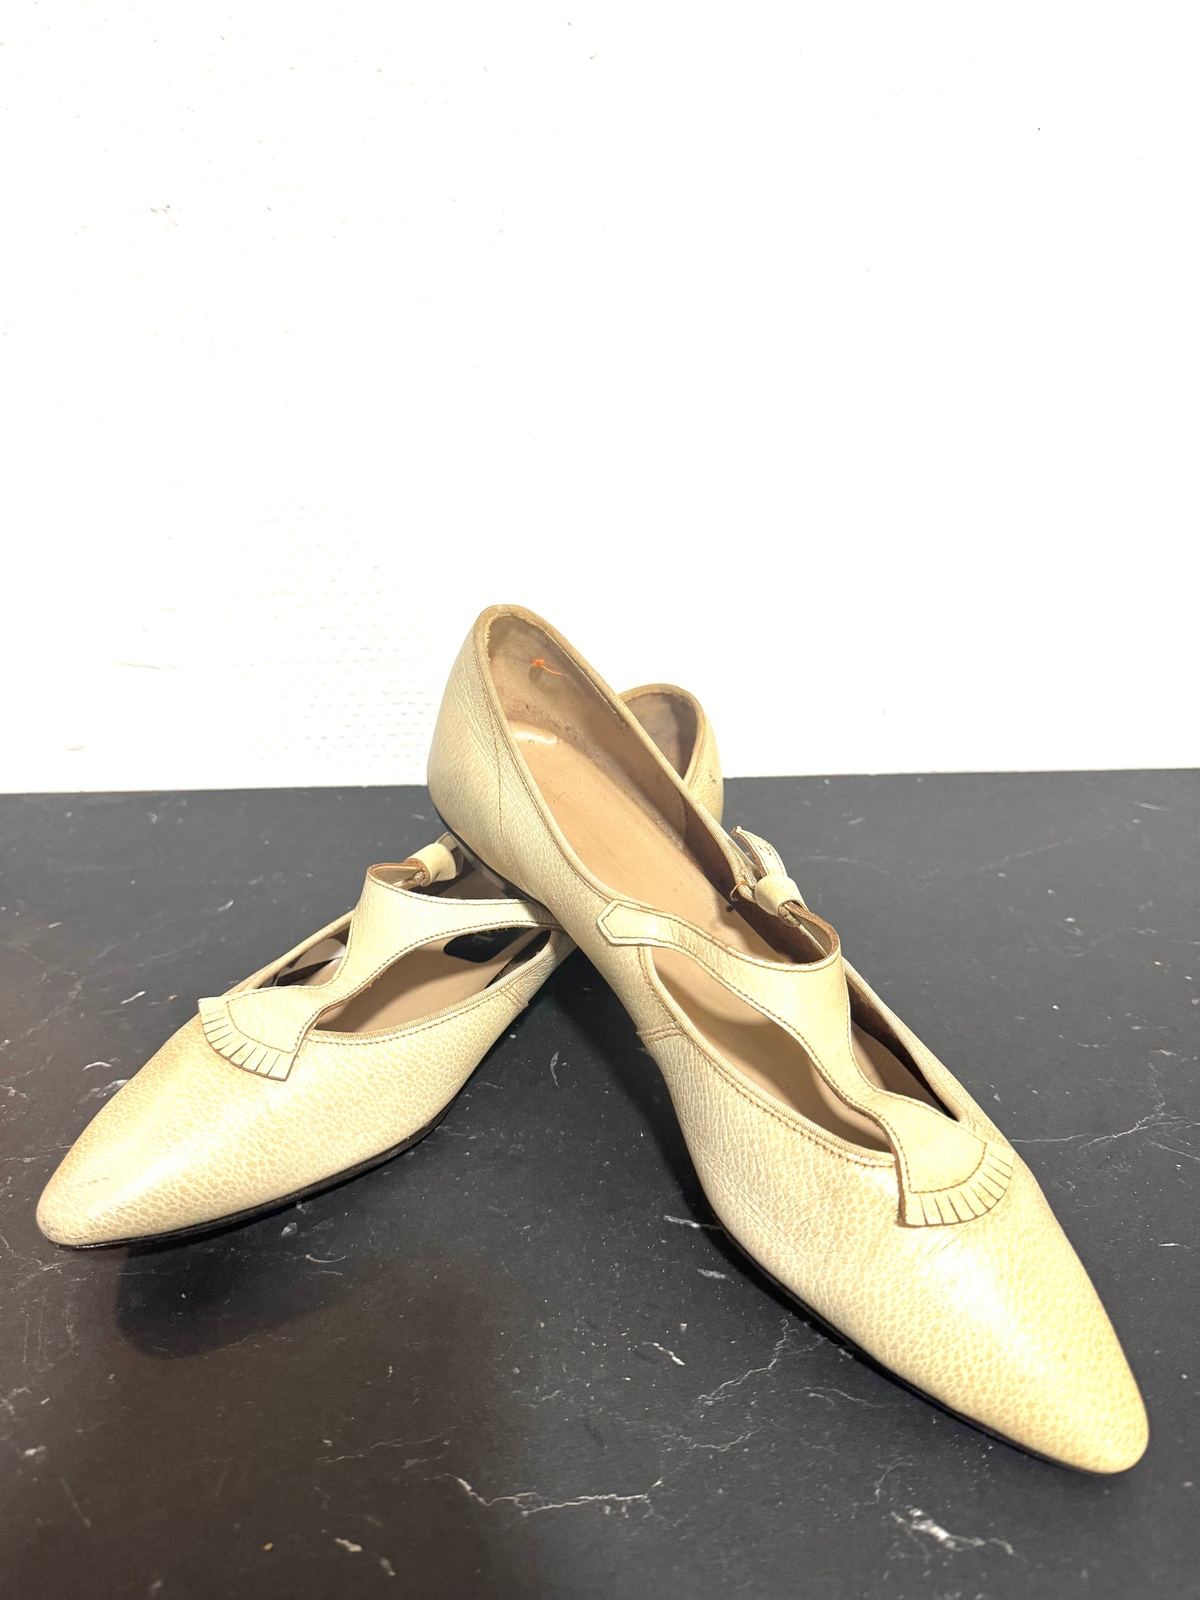 Vintage Pointy Personality shoes